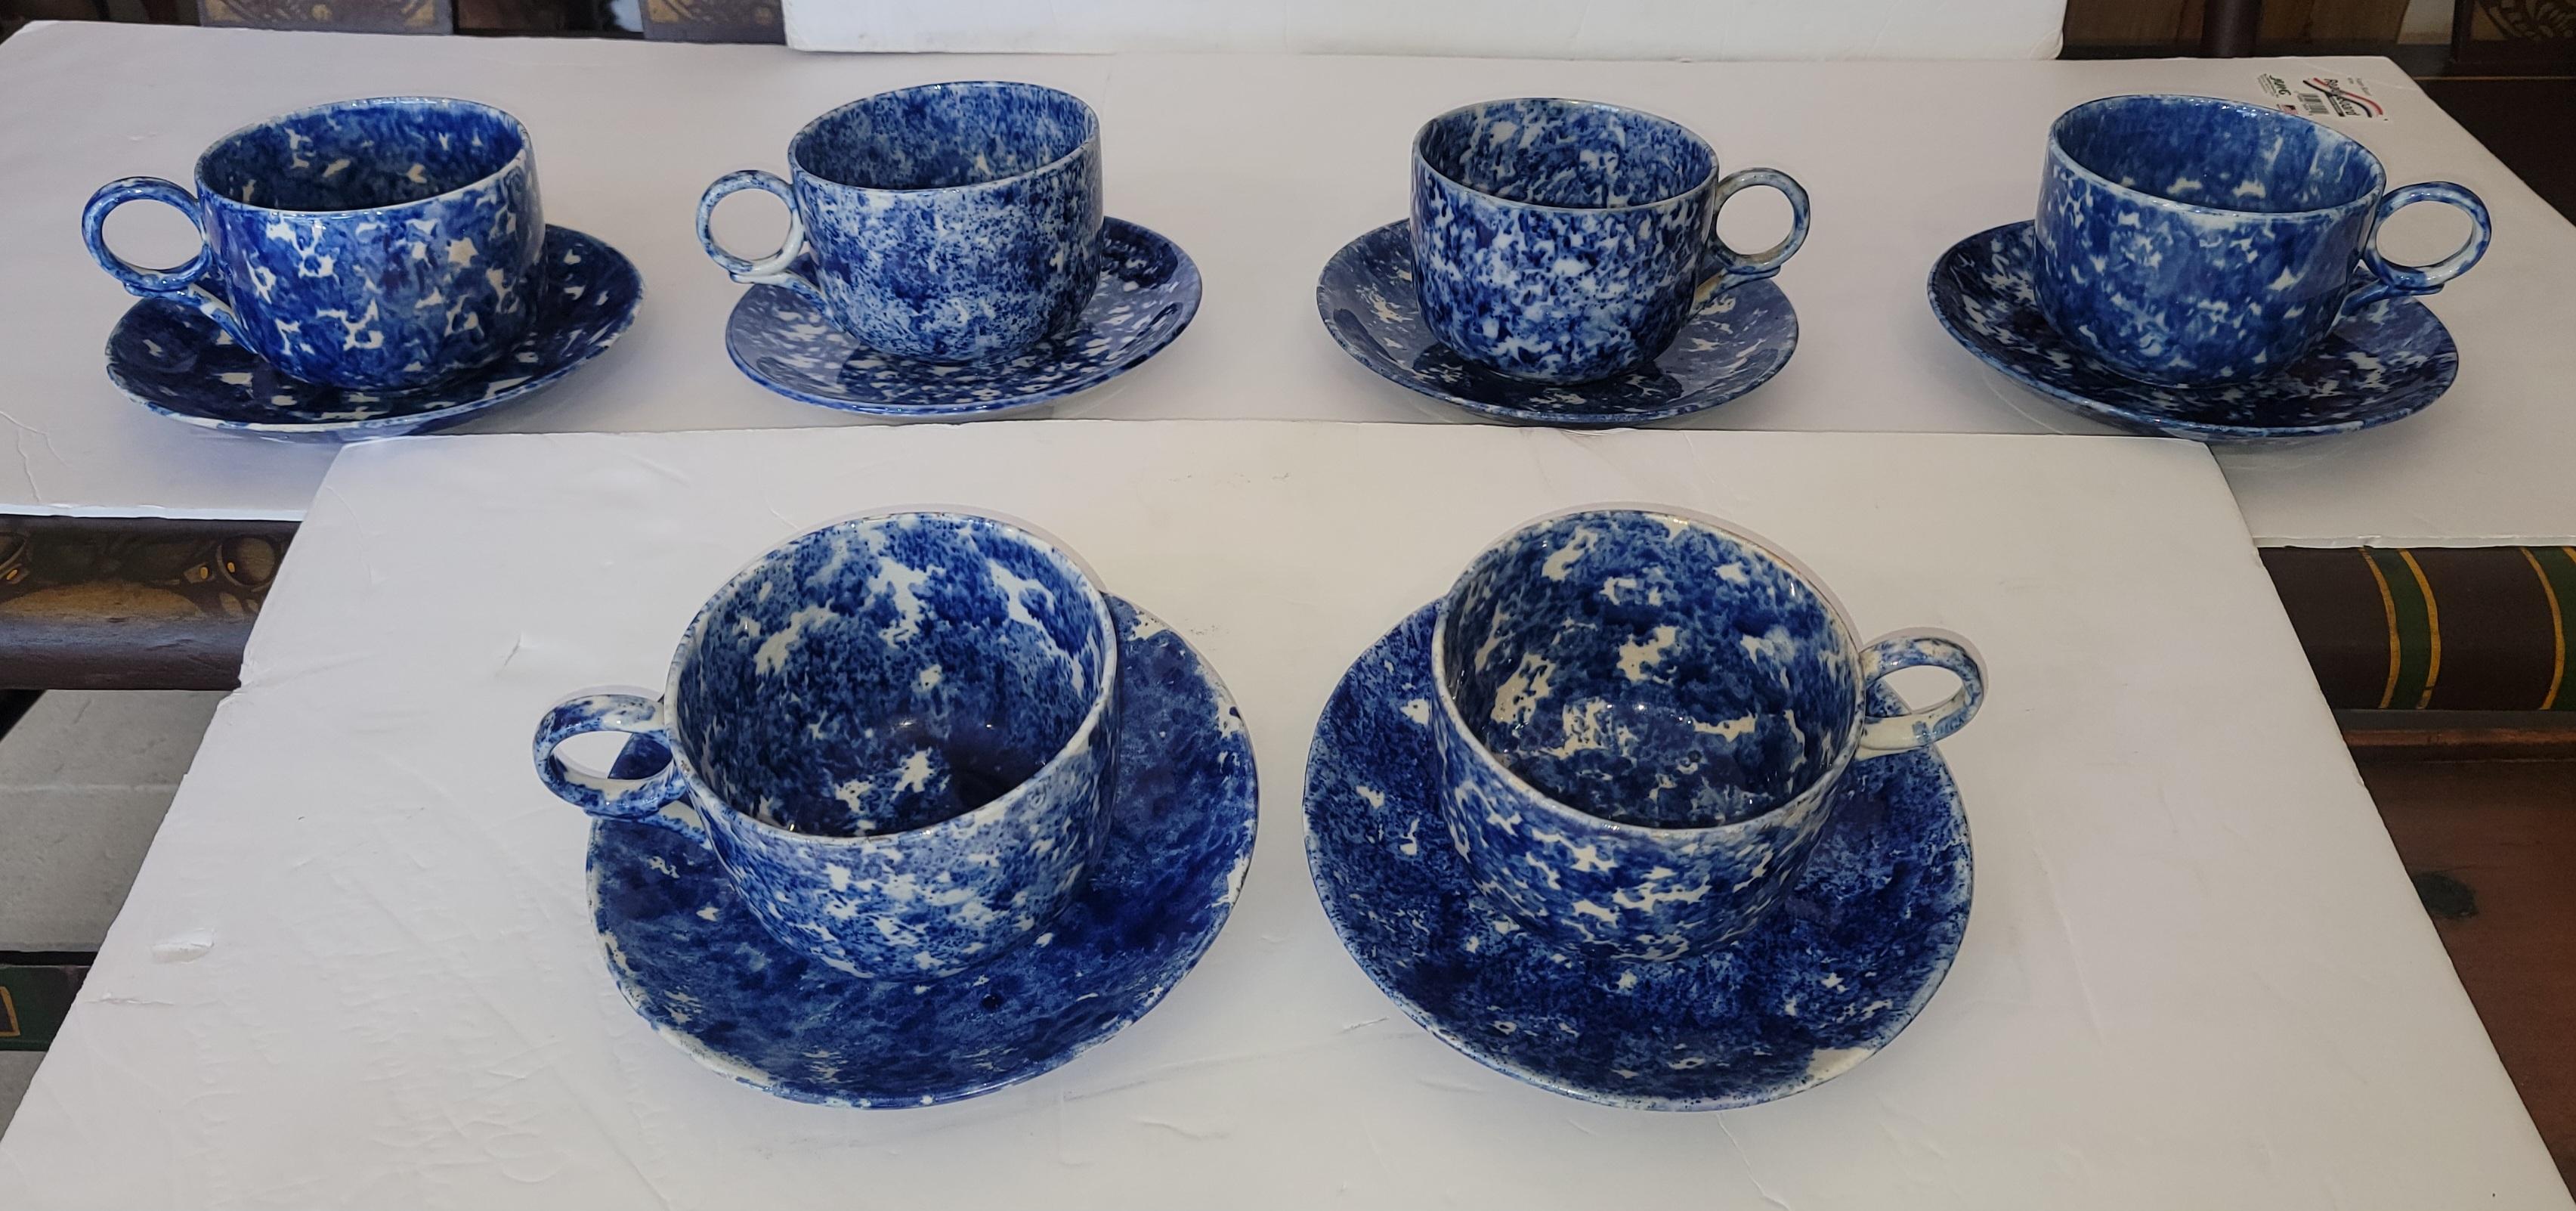 These amazing extra large 19thc  mush cups & saucers sponge ware are in mint condition and great colors.They are so unusual and very rare to find in a collection of six !